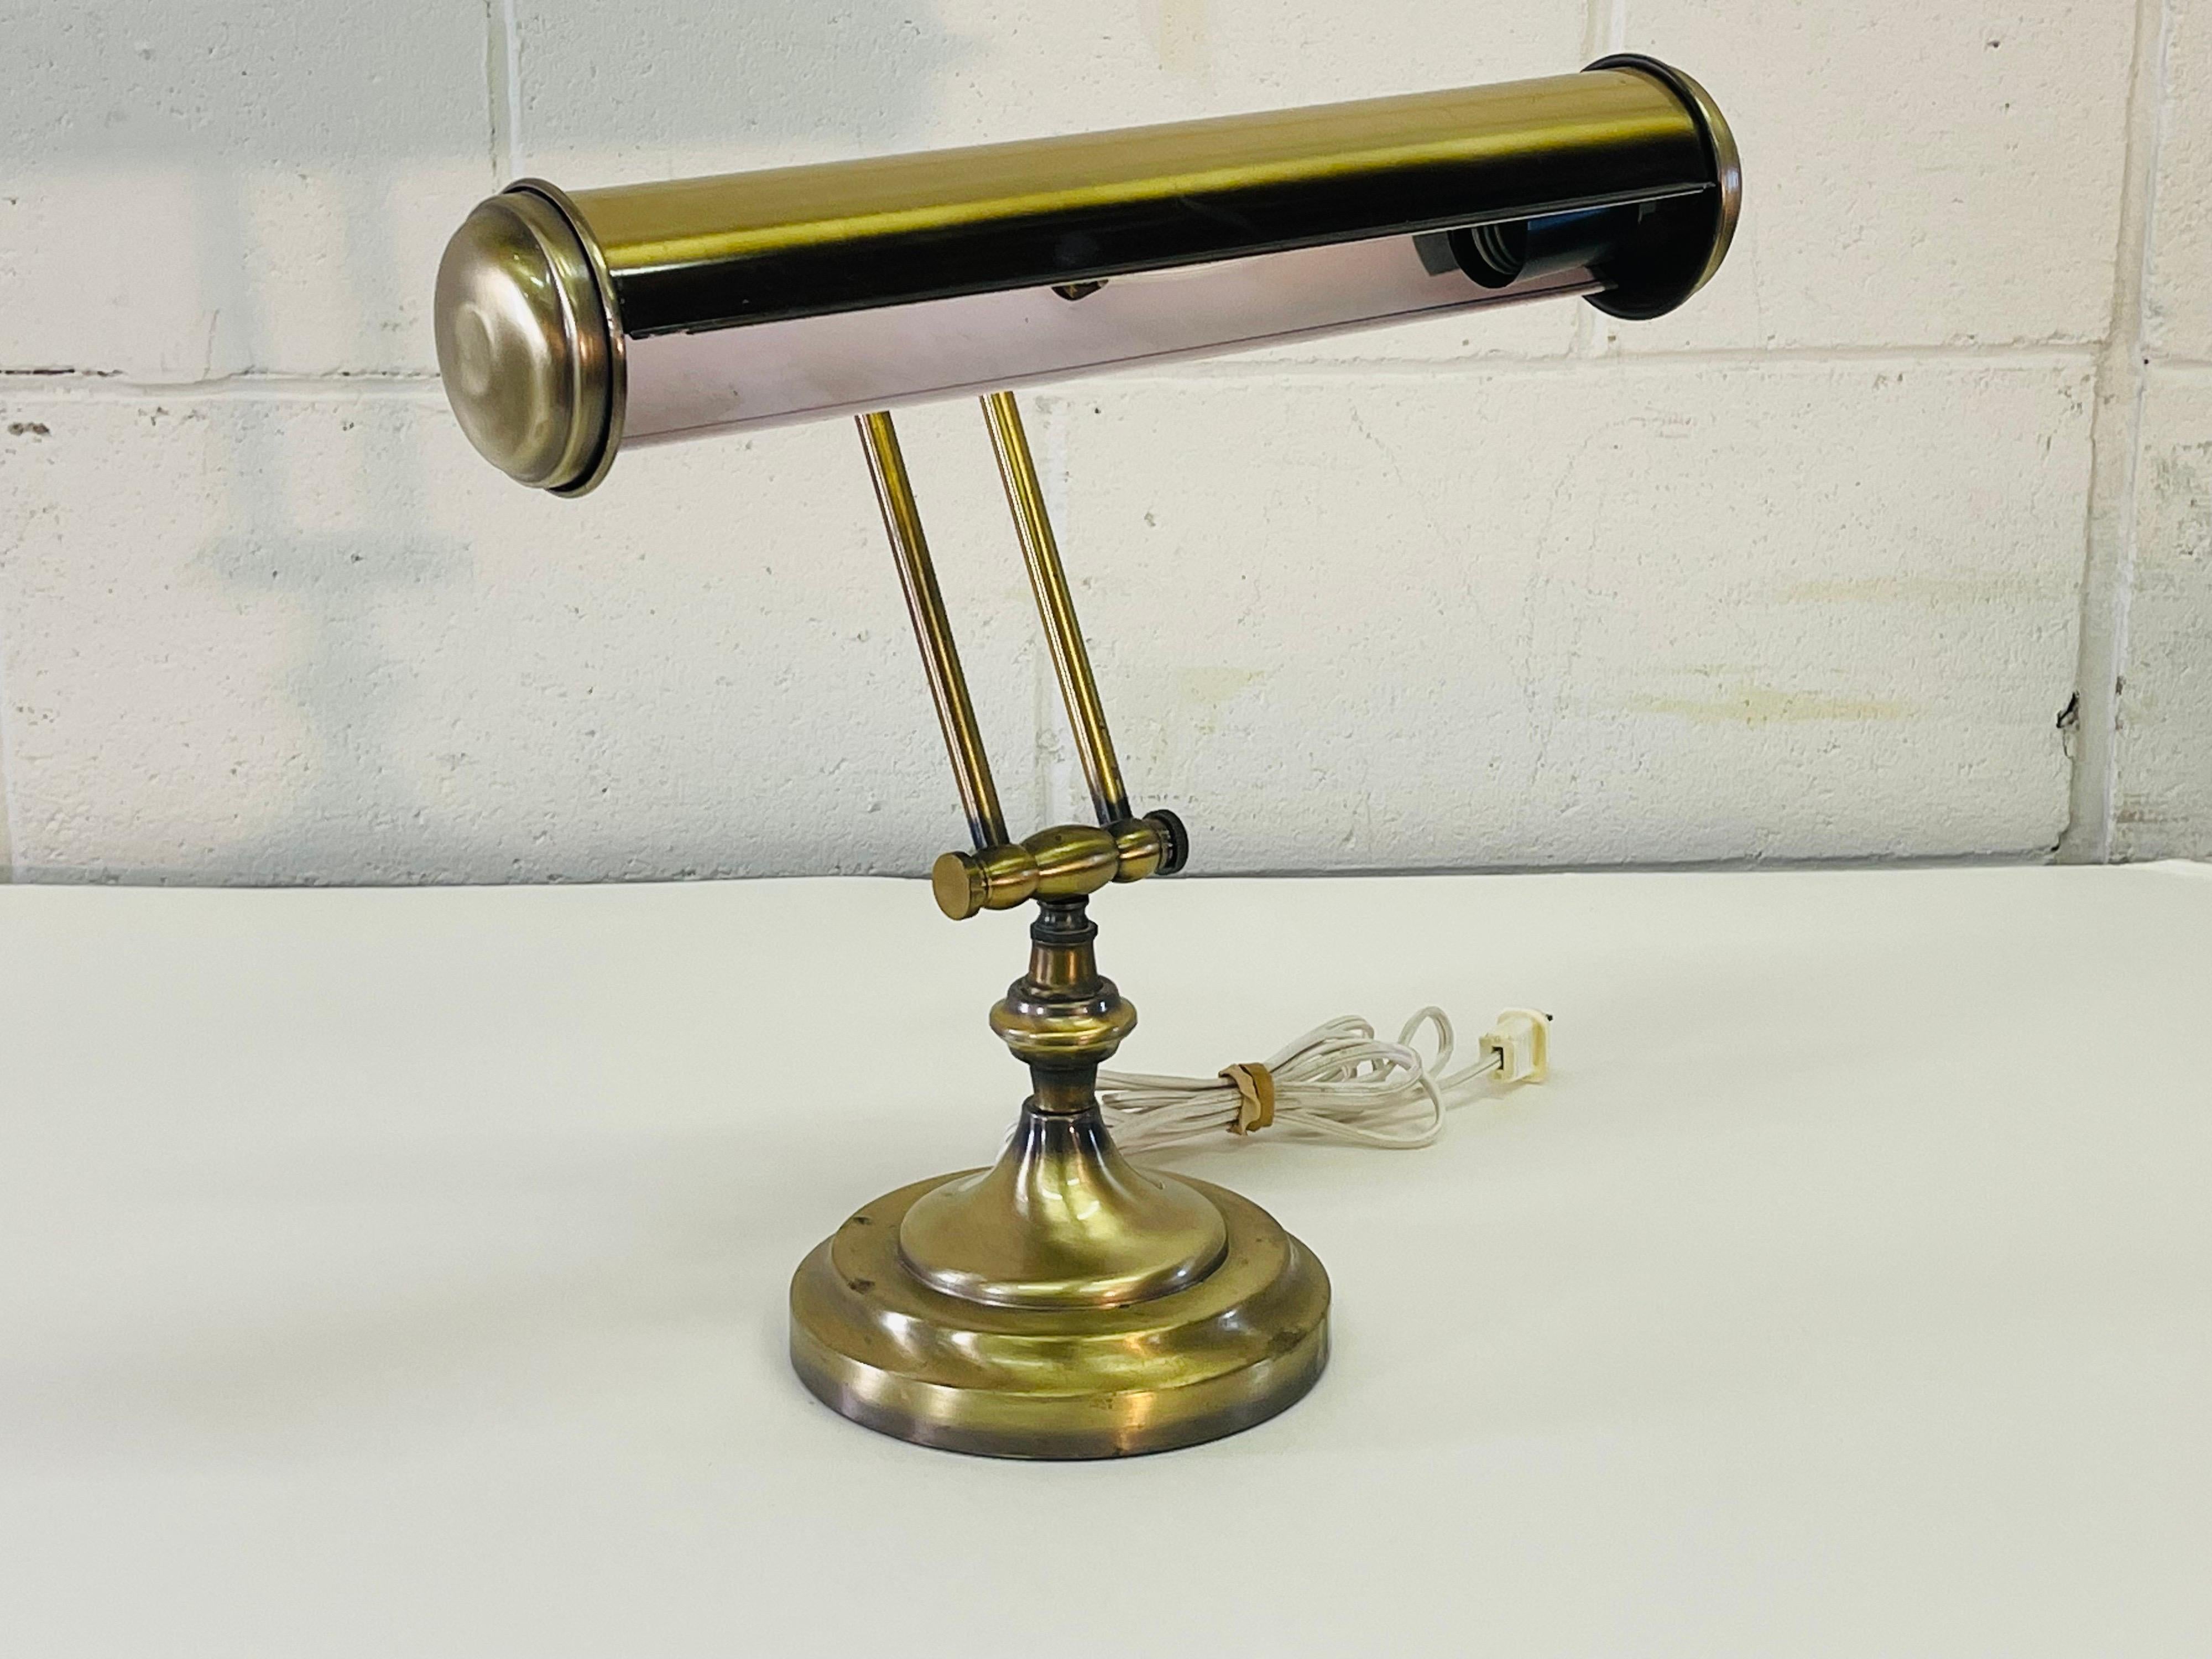 Vintage 1970s brushed brass adjustable desk lamp. The lamp is wired for the US and in working condition. Uses a cylindrical light bulb. Adjusts in two spots. Light tarnish from age. No marks.